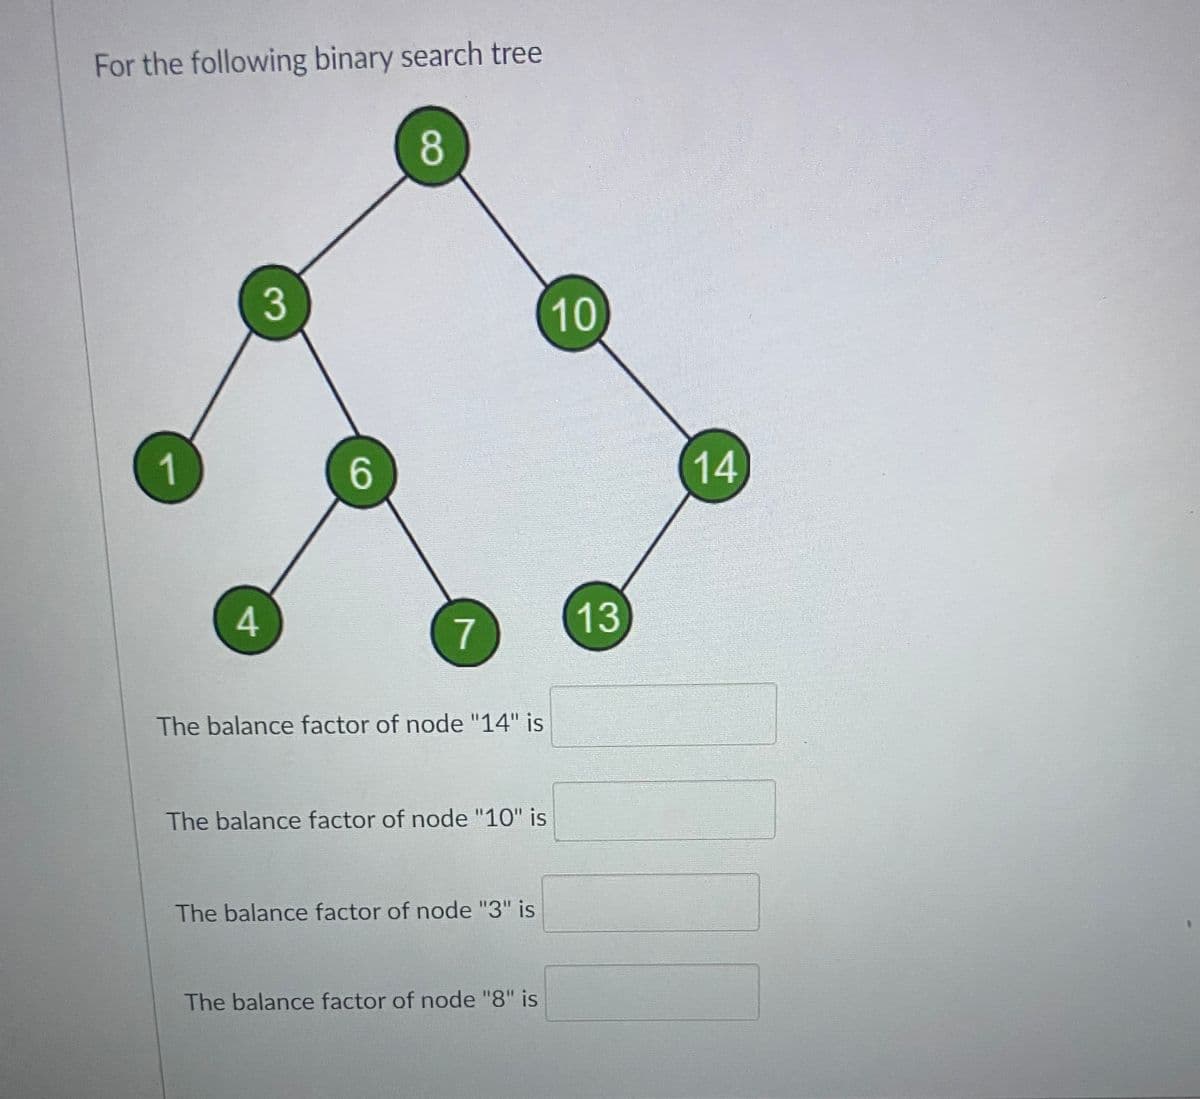 For the following binary search tree
1
4
3
6
8
7
The balance factor of node "14" is
The balance factor of node "10" is
The balance factor of node "3" is
The balance factor of node "8" is
10
13
14